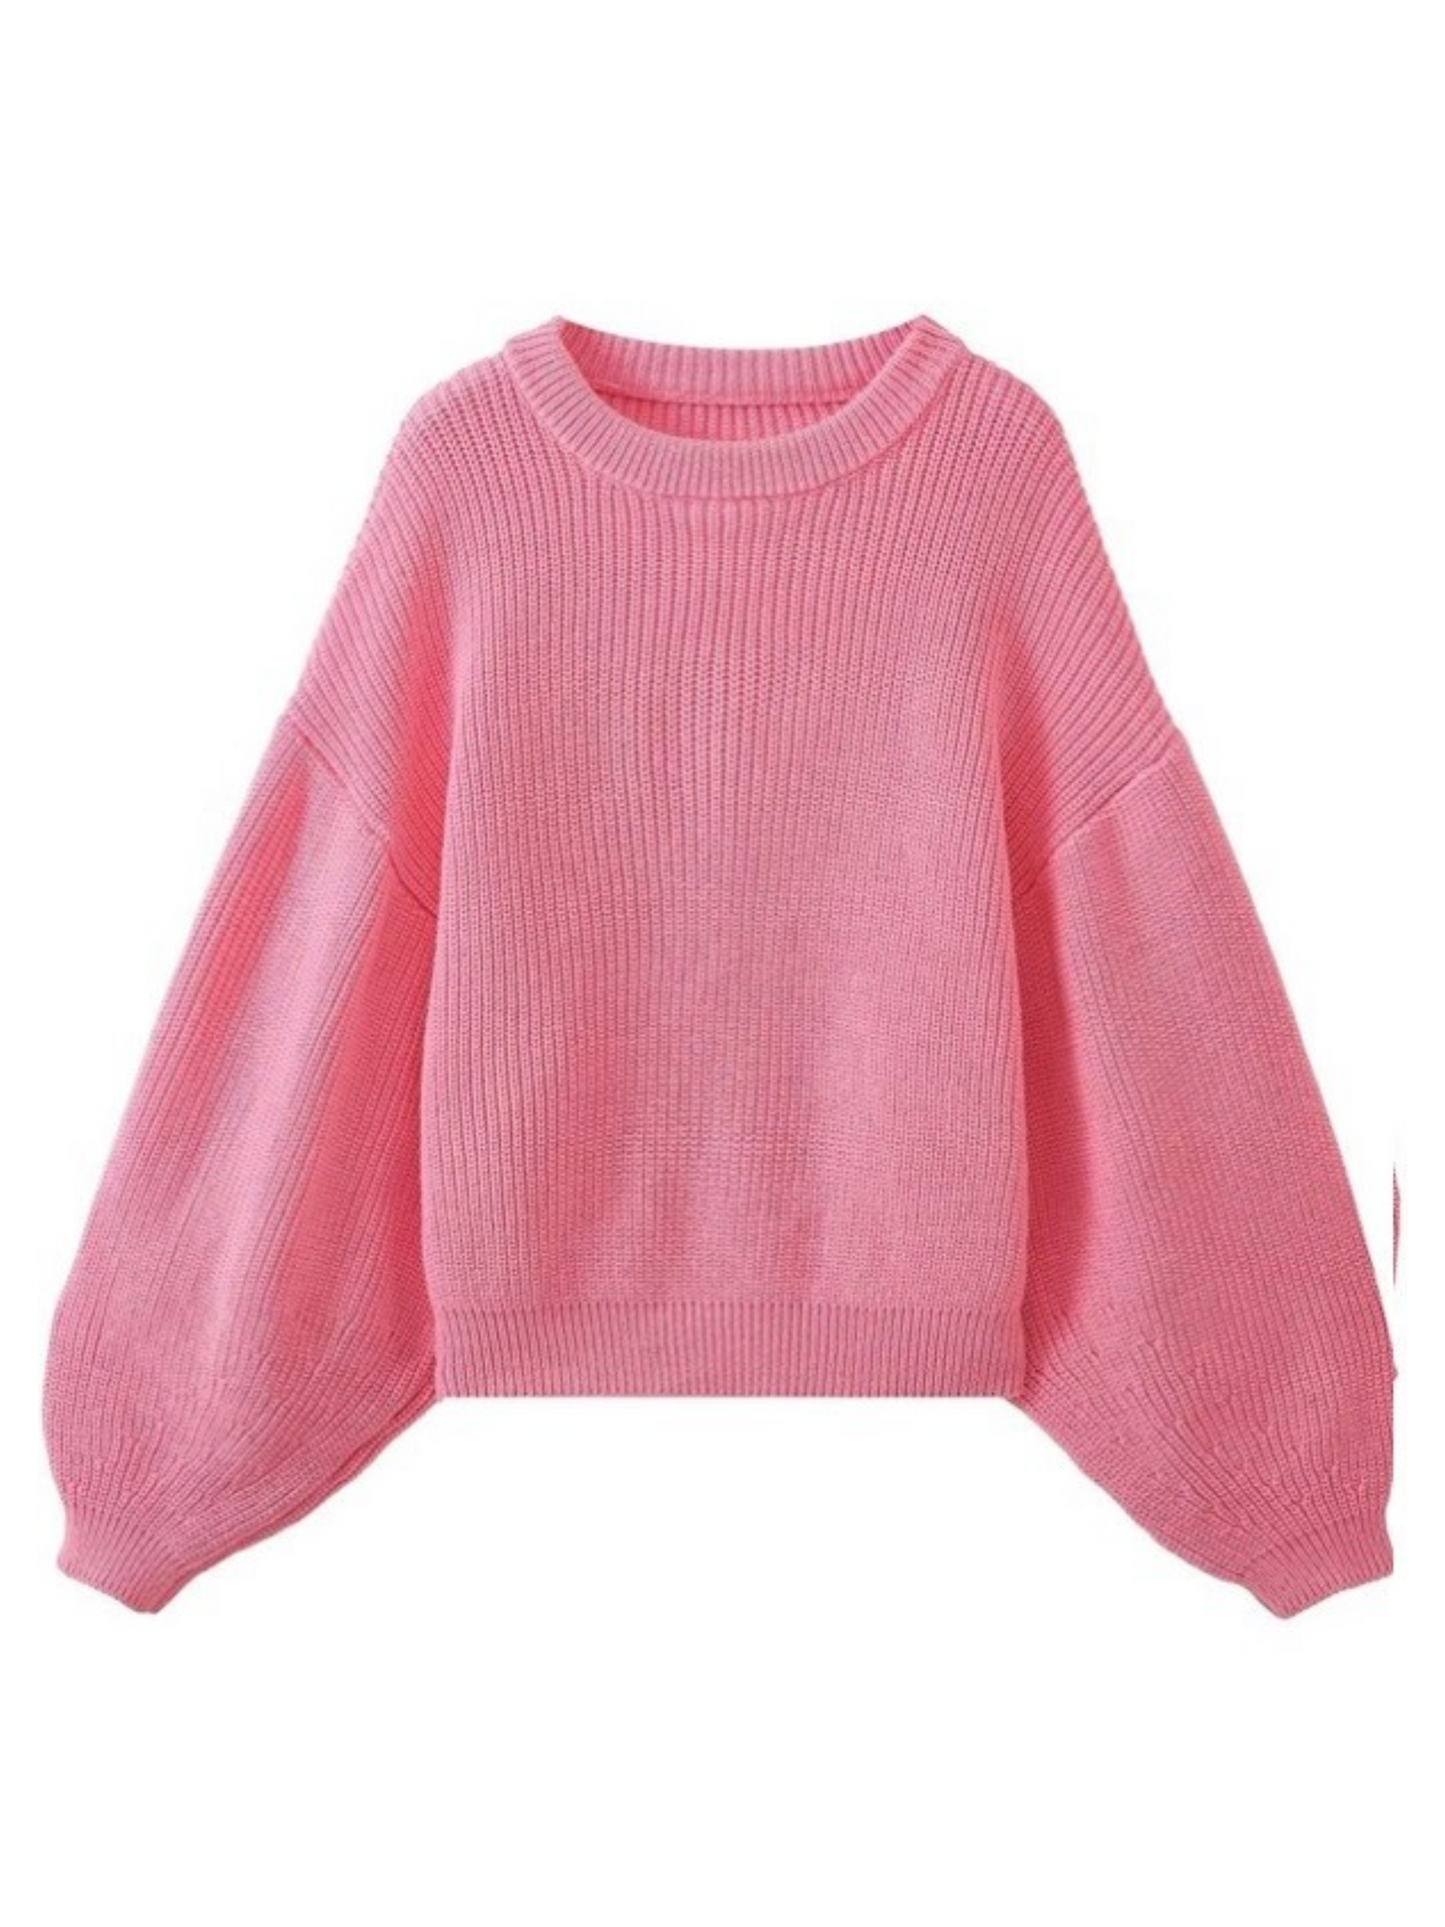 solid pink balloon sleeve sweater